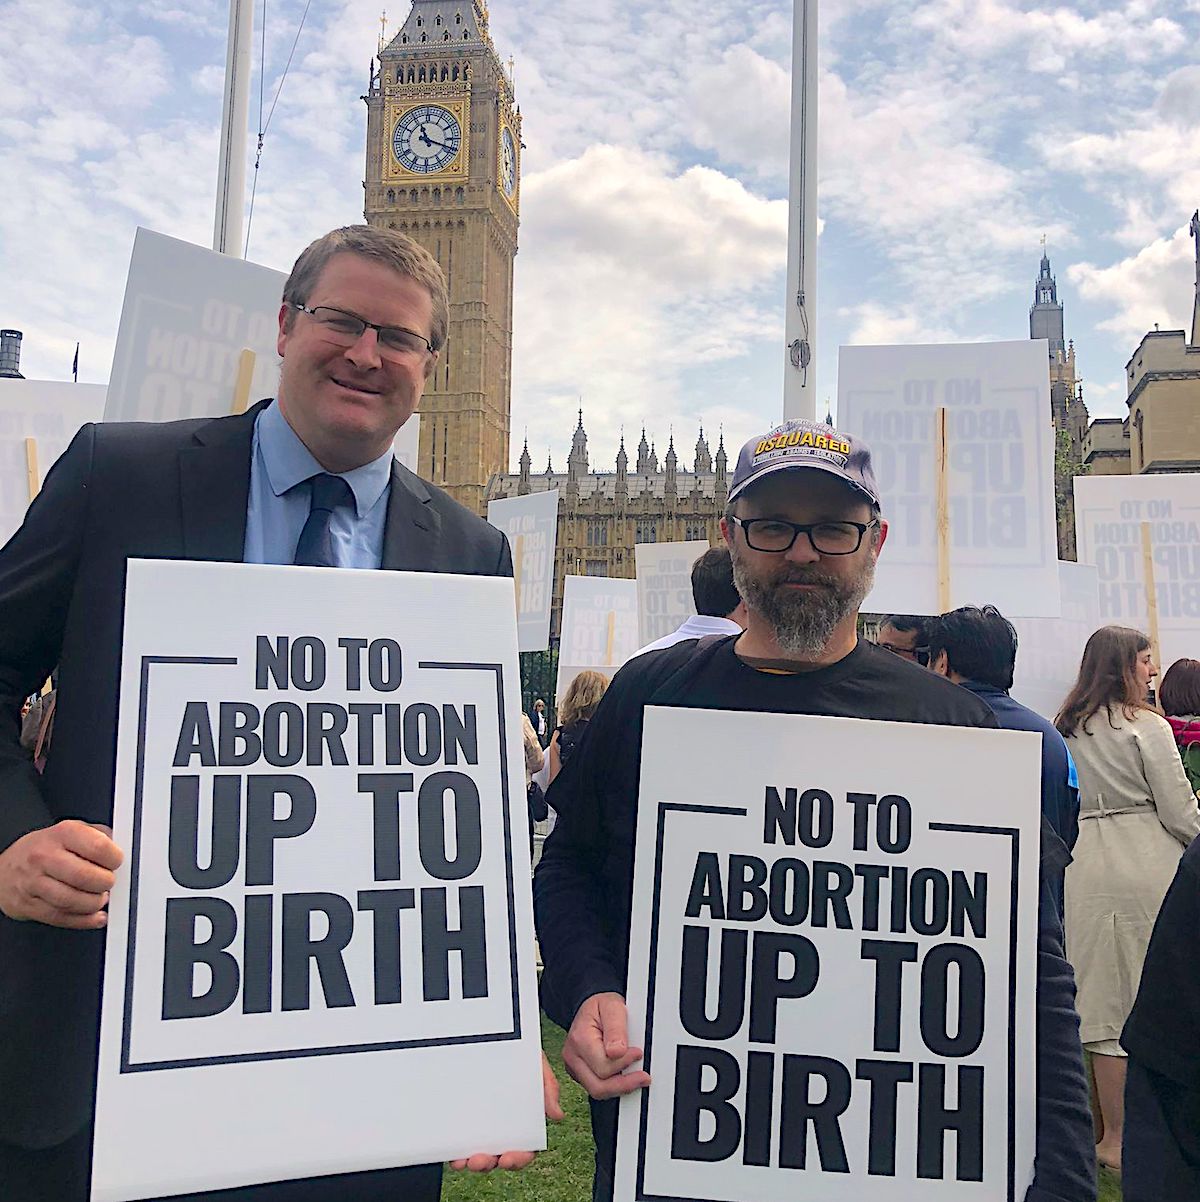 Robert in the Rally Not to Abortion up to birth at the Parliament, London